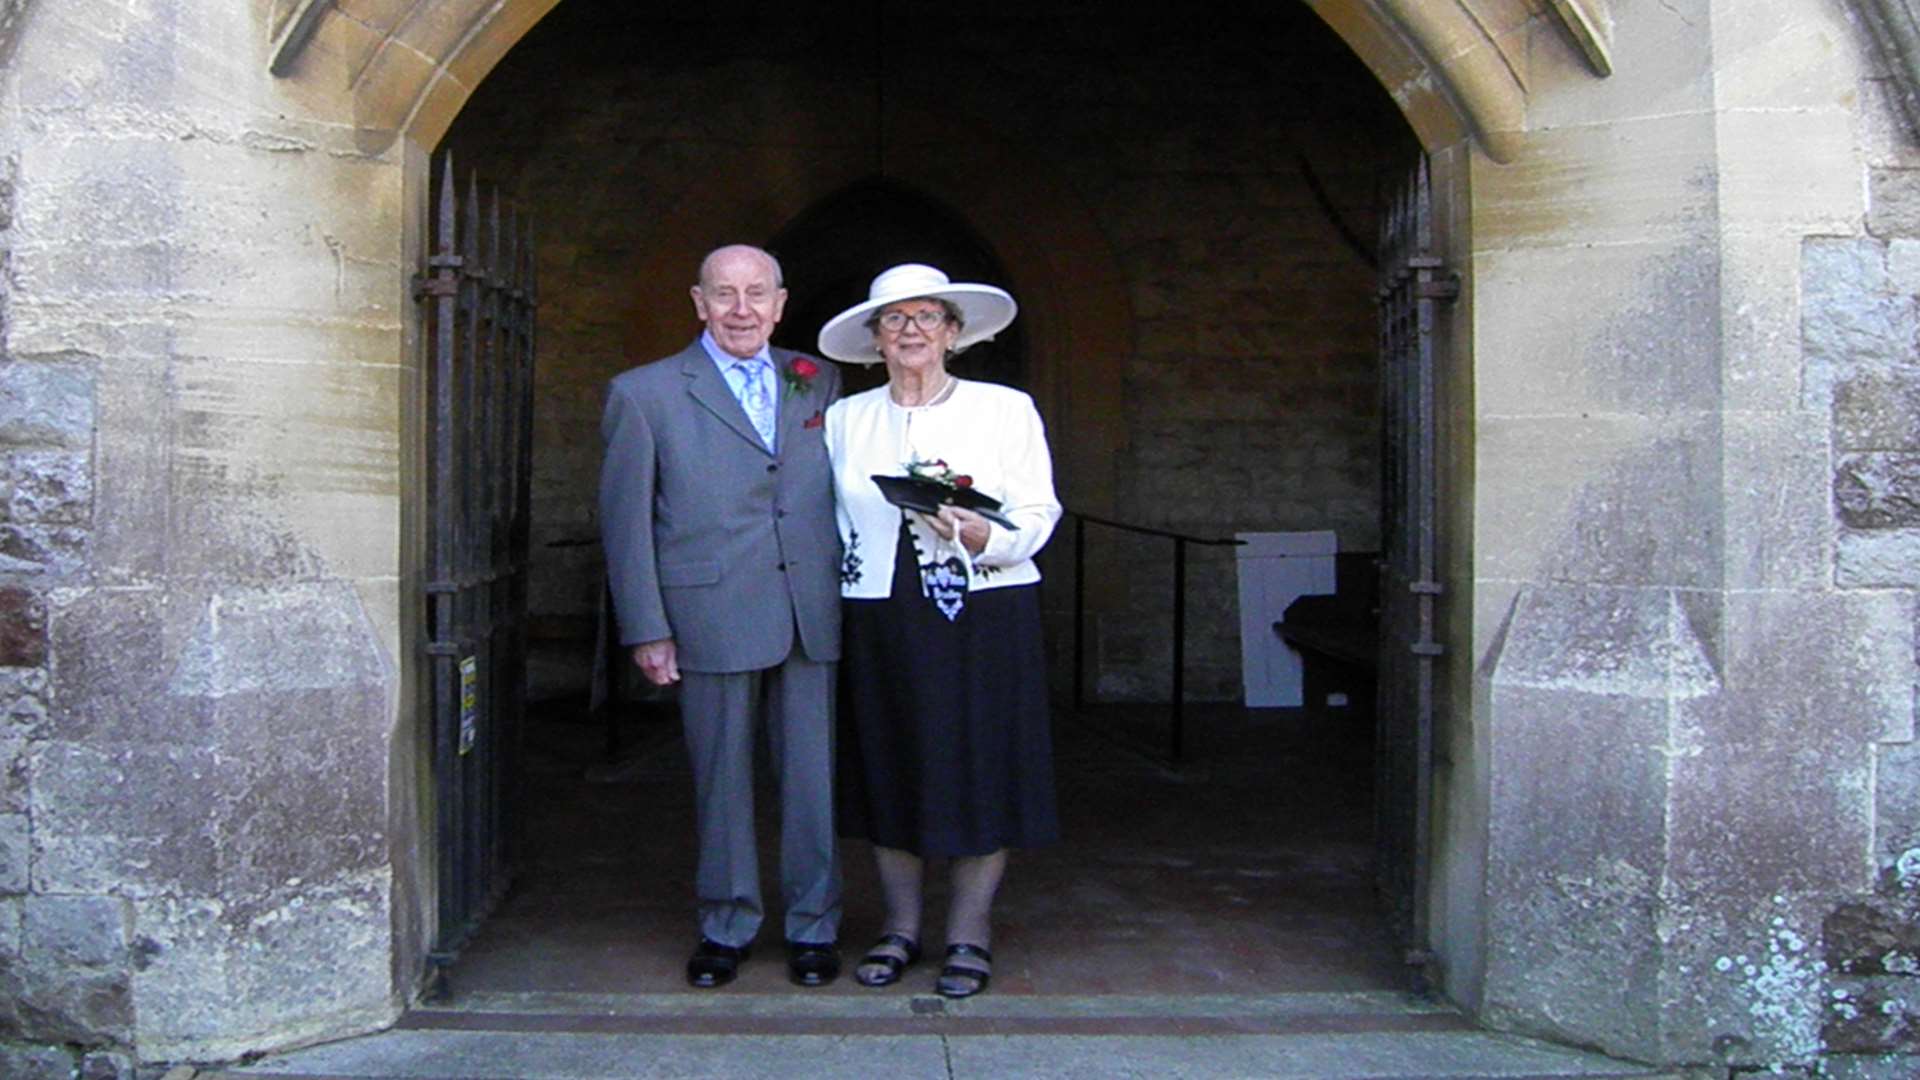 Mr and Mrs Bradley leave the church